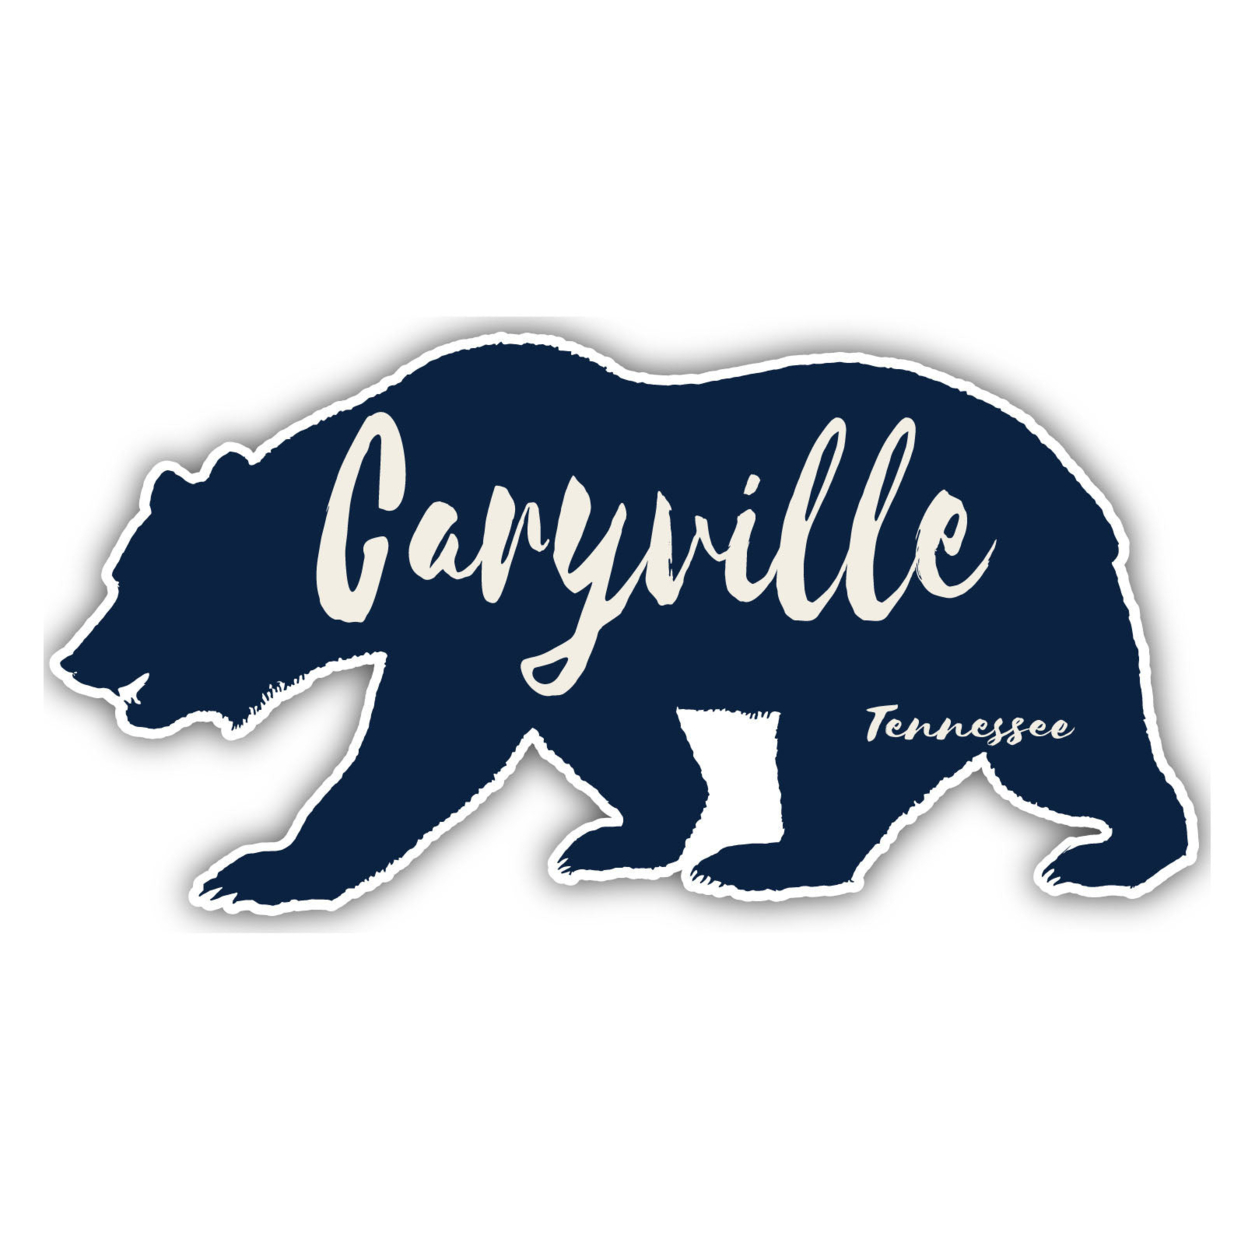 Caryville Tennessee Souvenir Decorative Stickers (Choose Theme And Size) - 4-Pack, 6-Inch, Camp Life